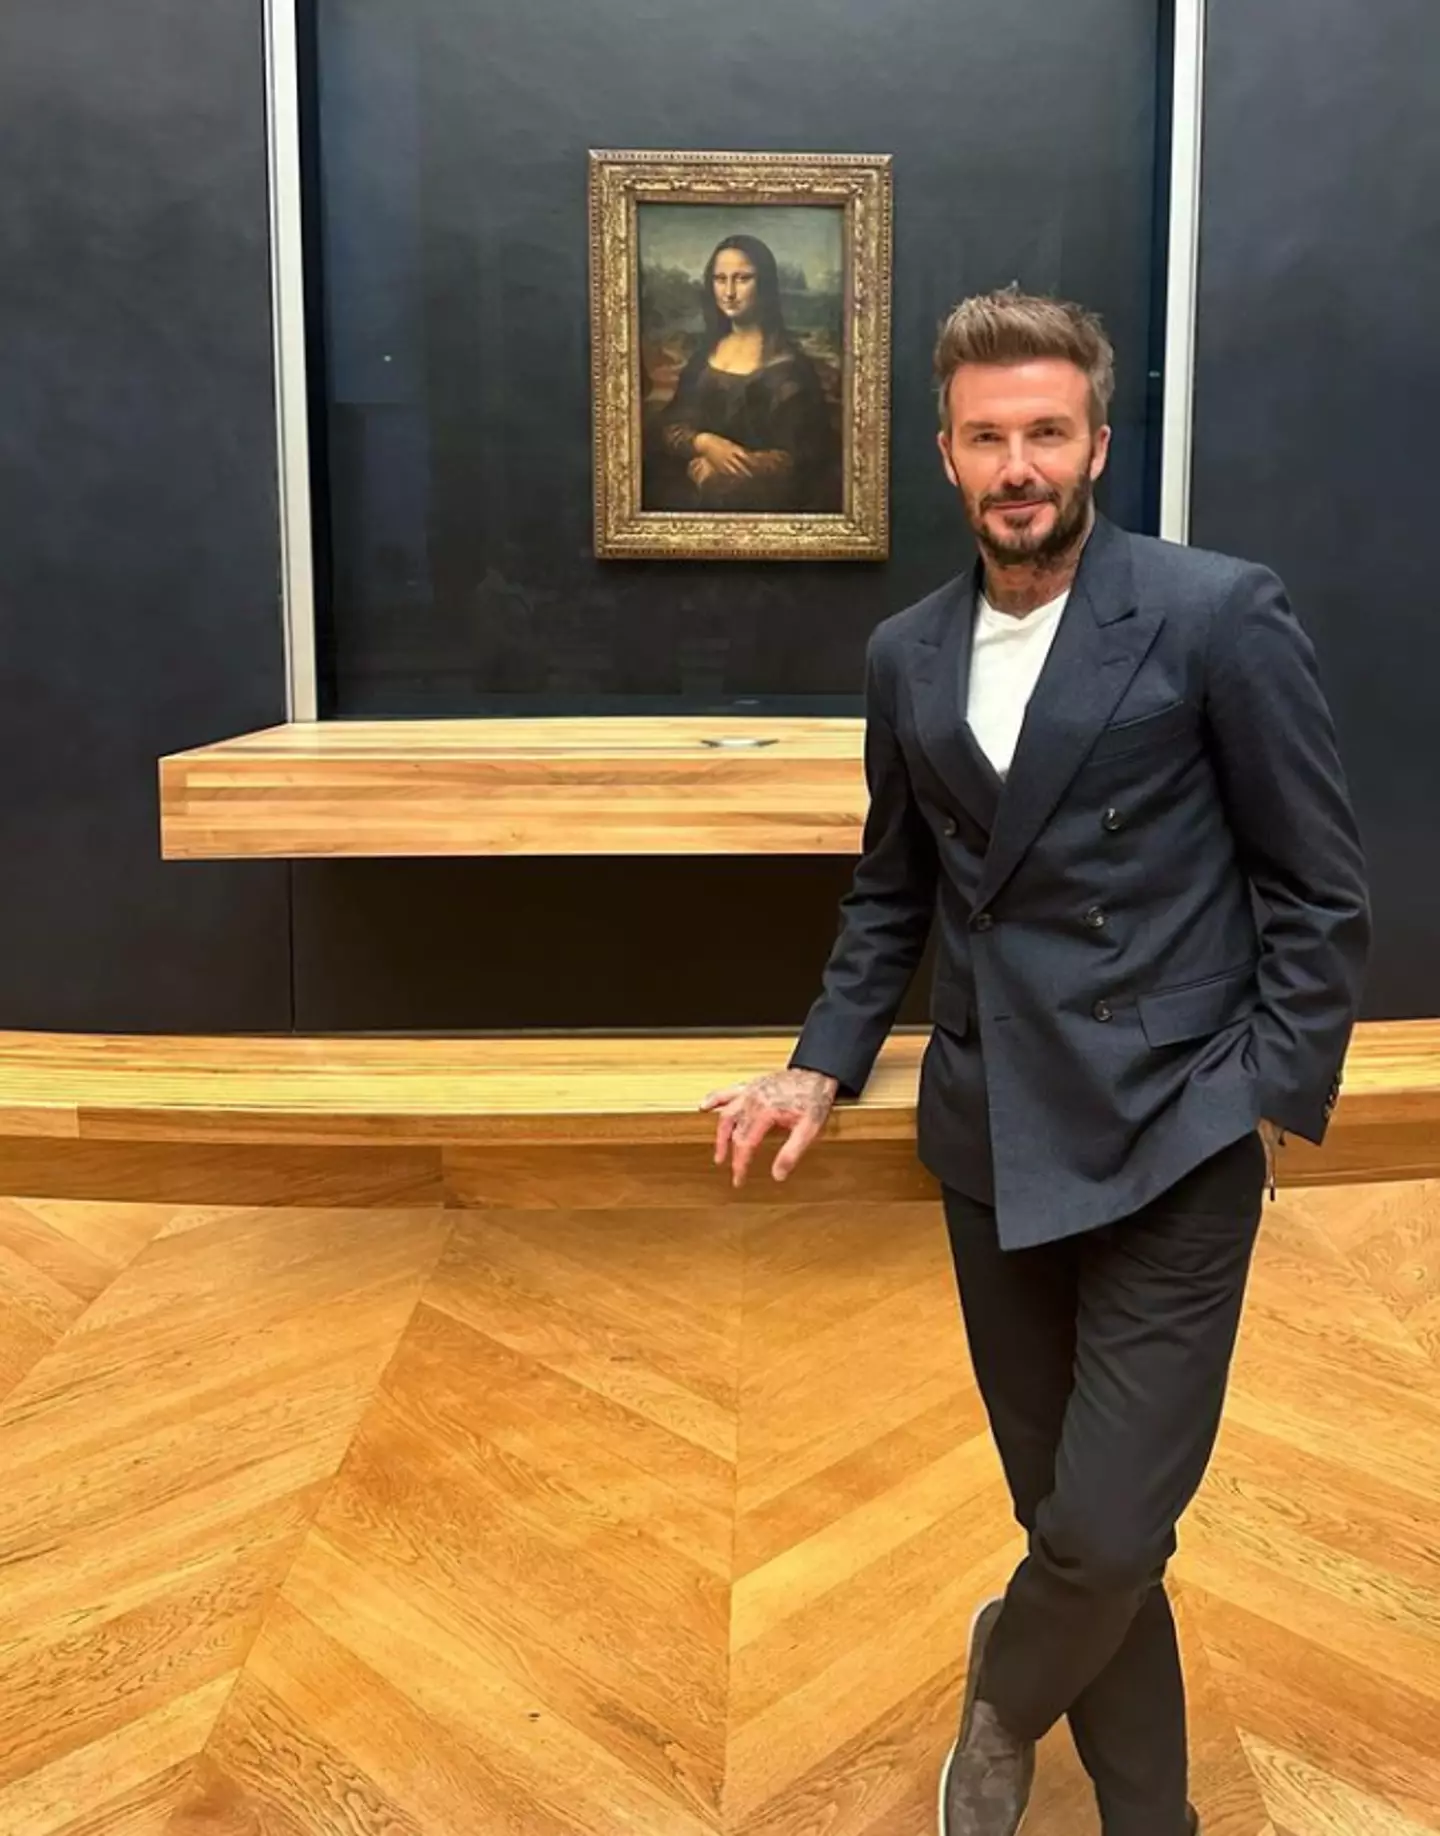 David Beckham has been opening up about his struggles with OCD.